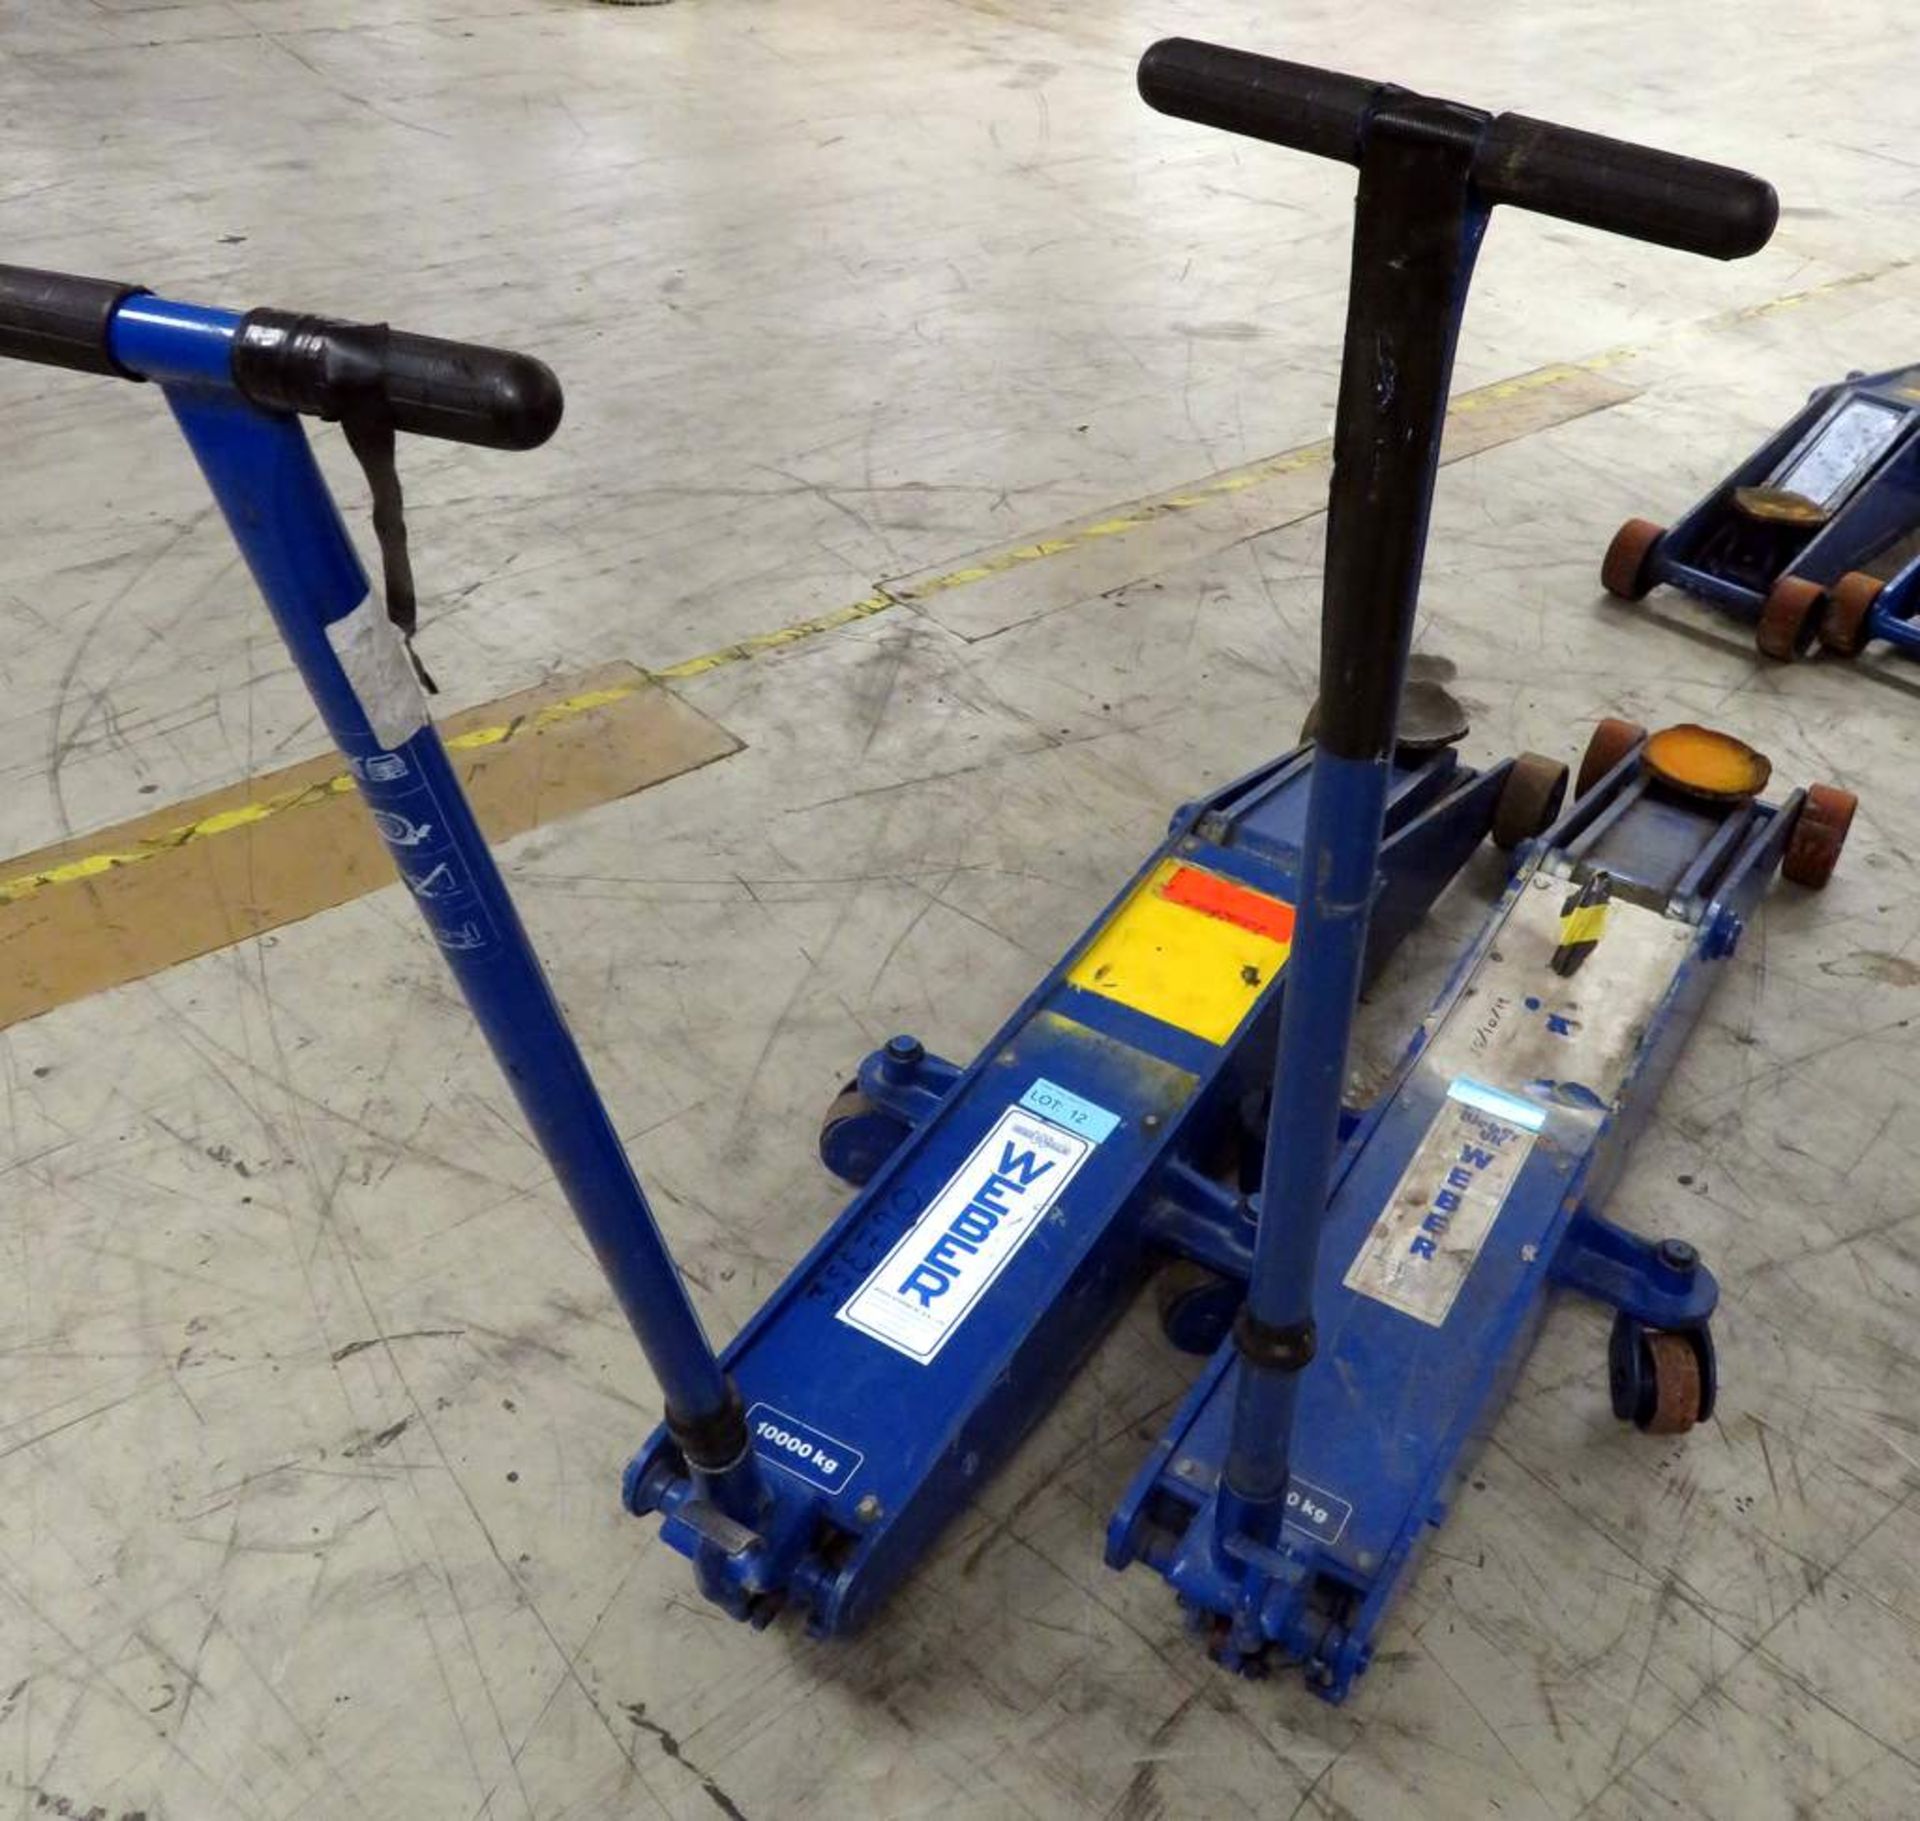 2x Weber 10 Tonne Vehicle Trolley Jacks Complete With Handle - WDK100LQ - Working Condition - Image 2 of 9